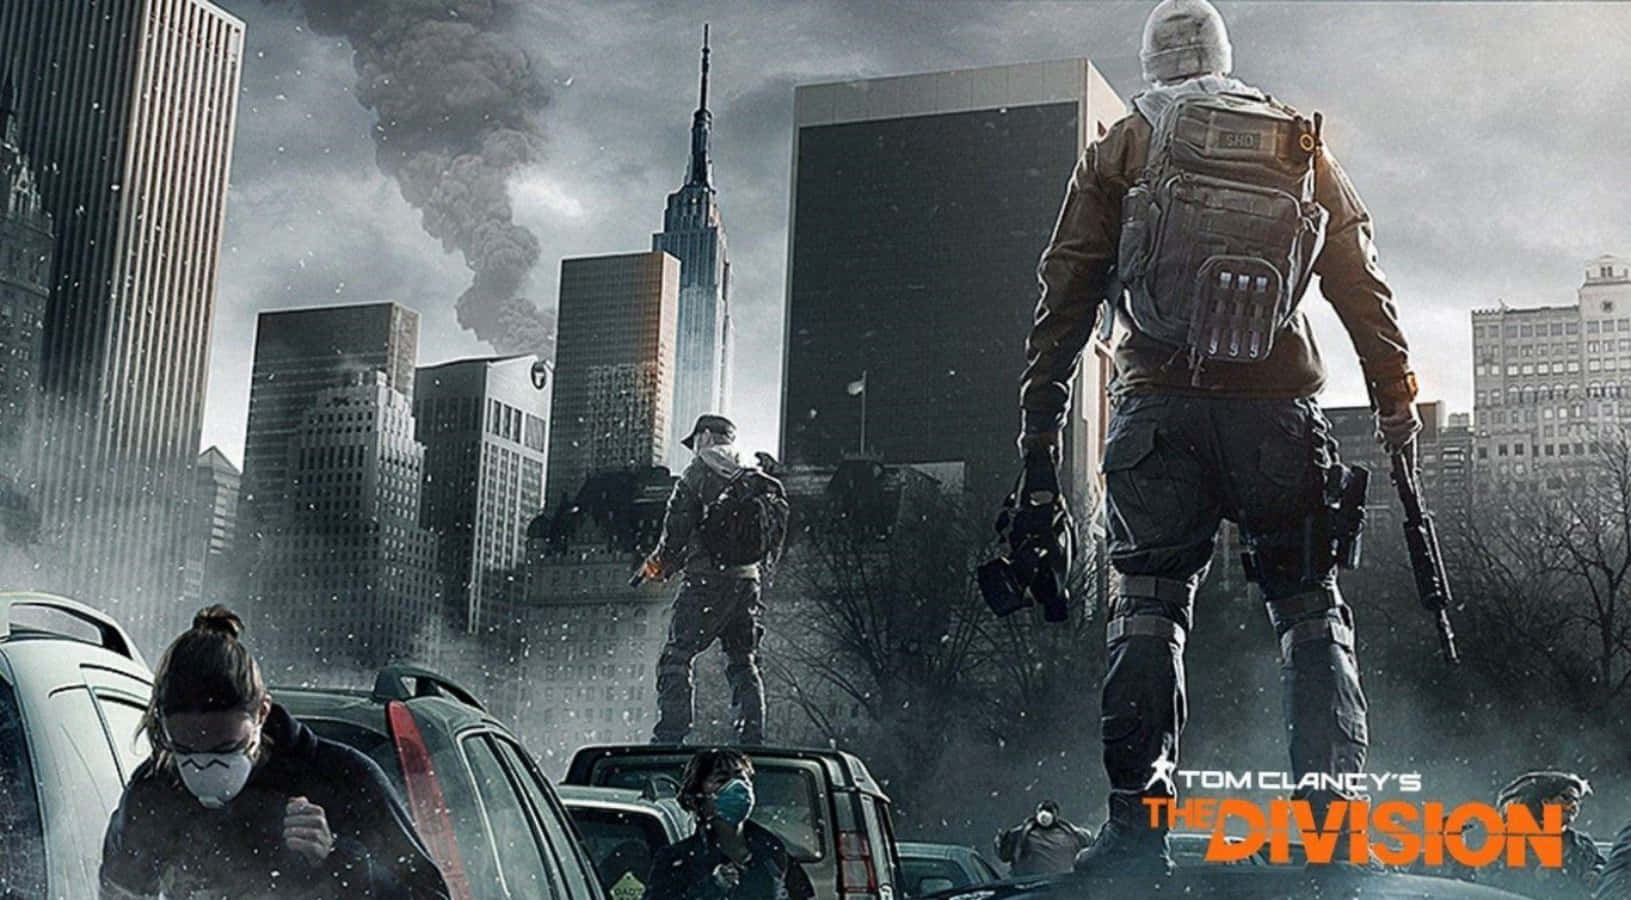 Image  "A screenshot of the Ubisoft game, The Division, with an overview of the game's desktop." Wallpaper